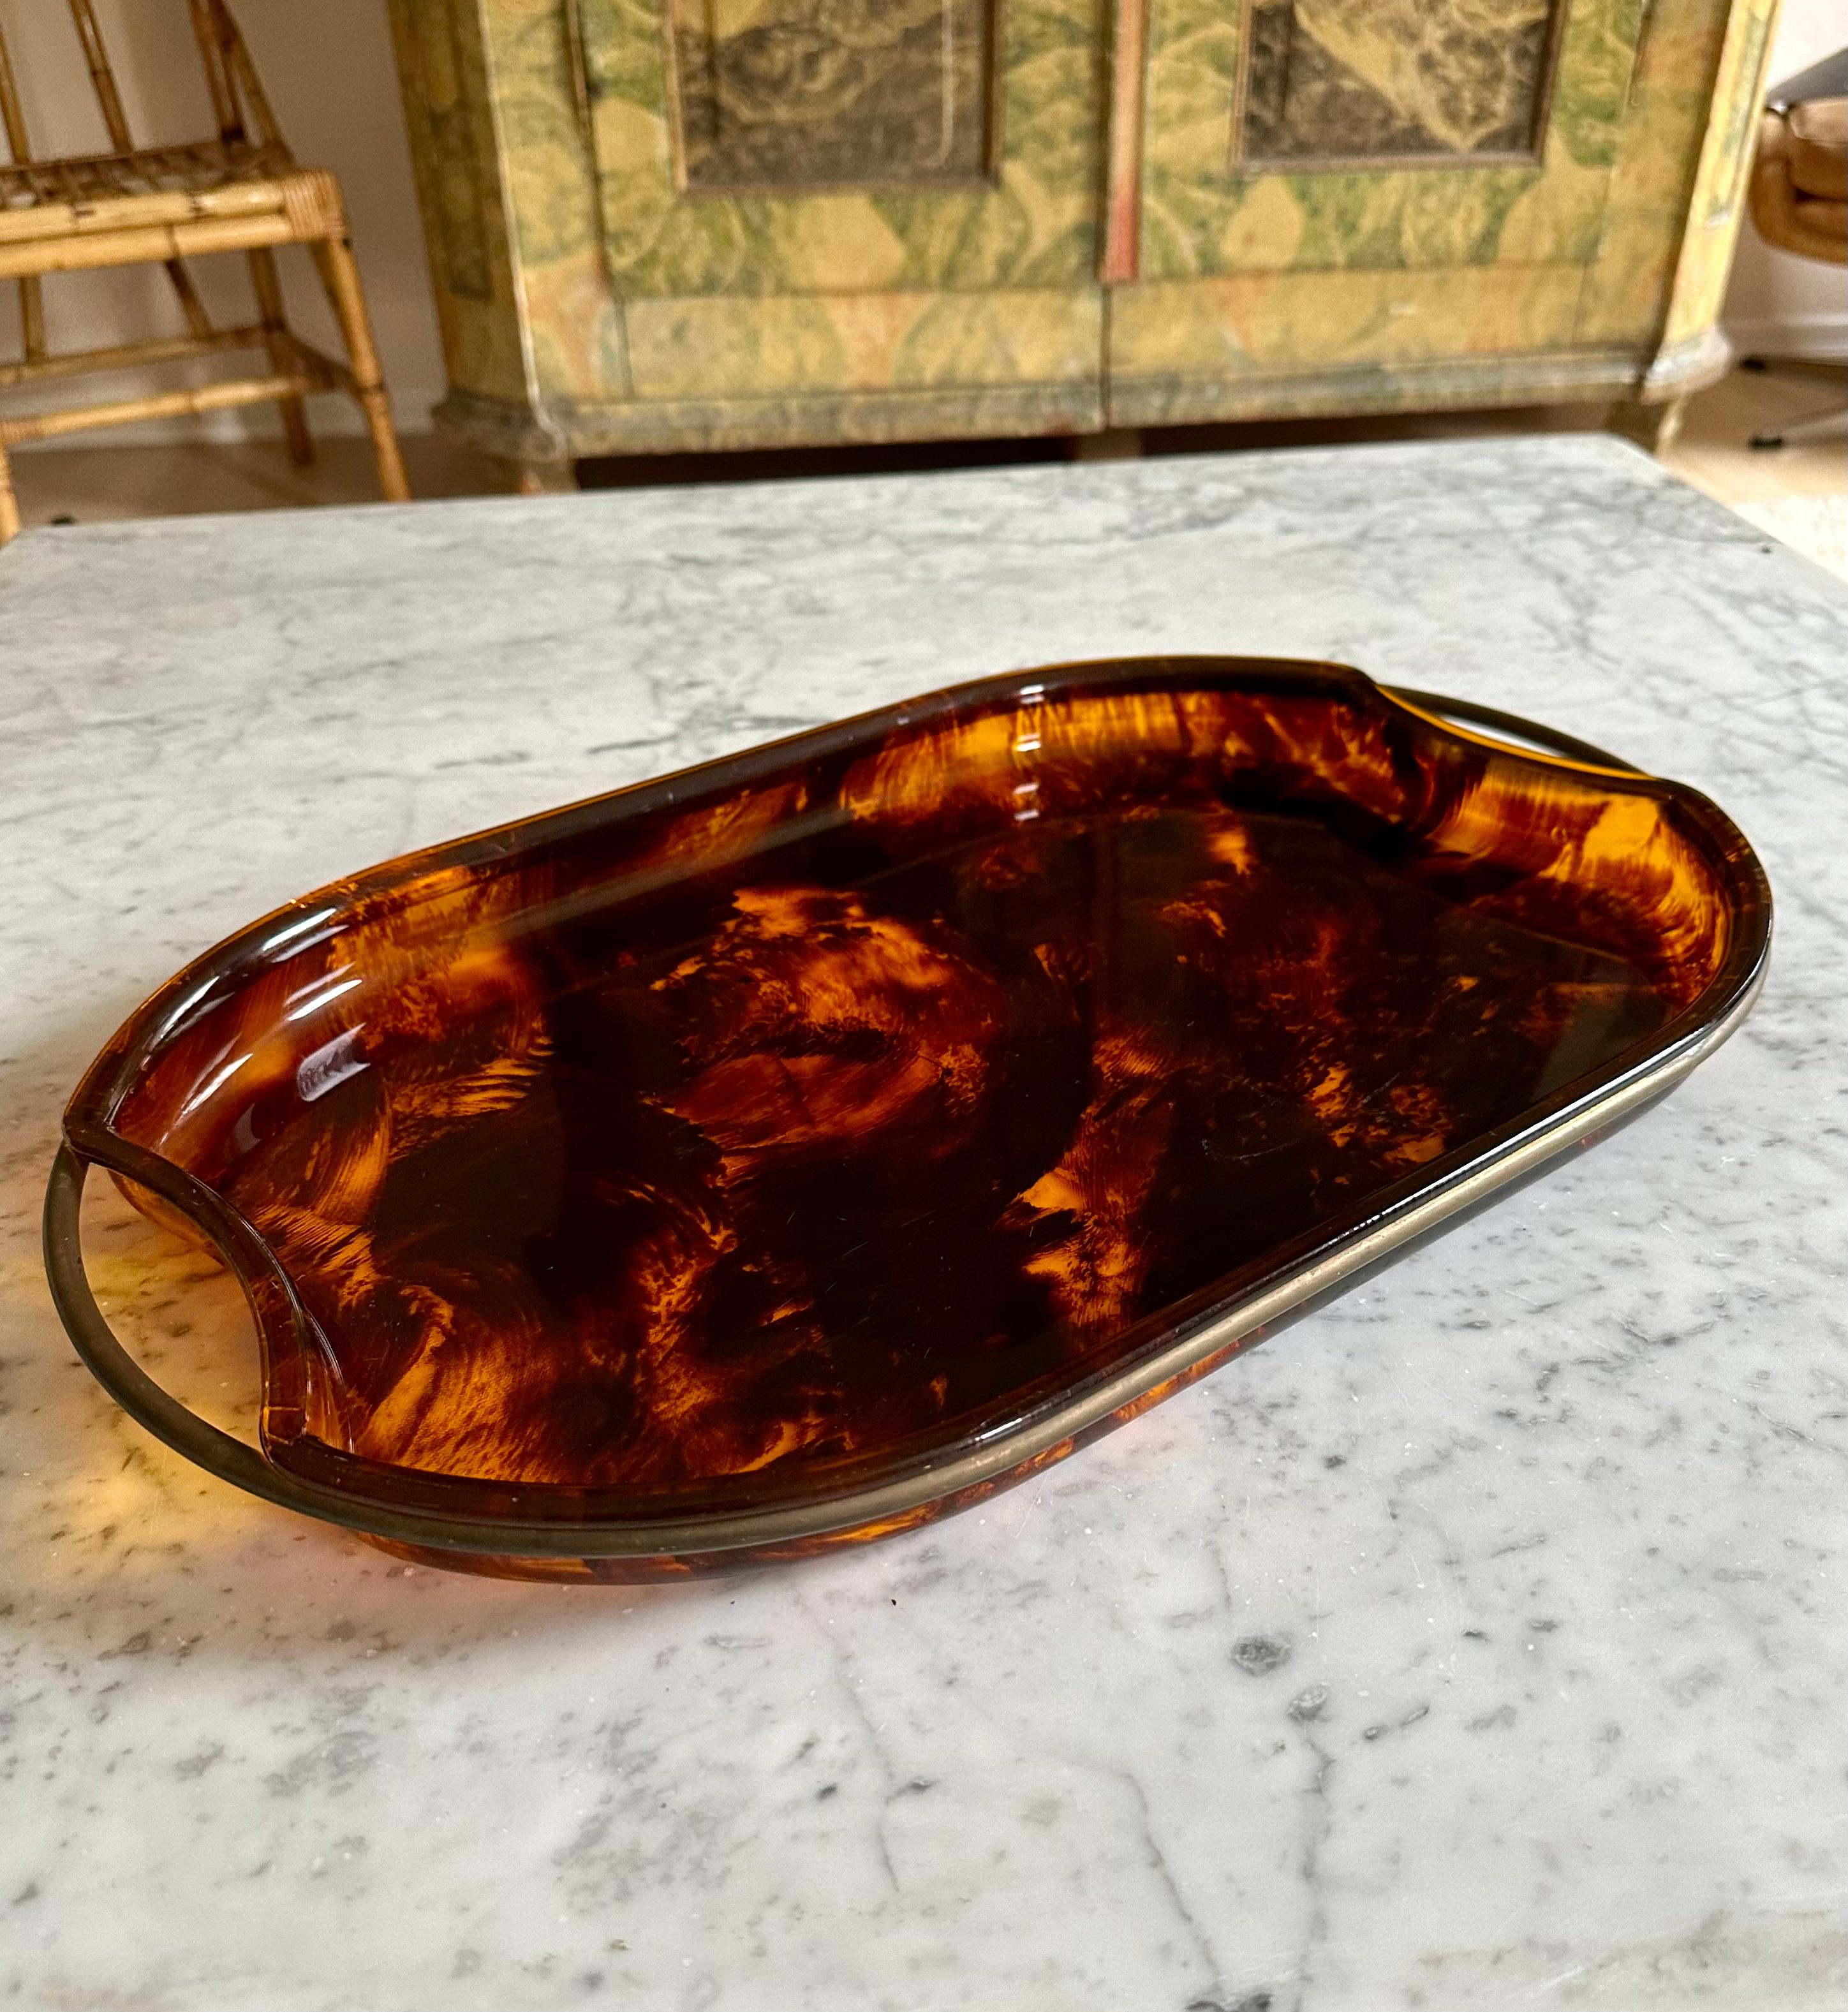 Hollywood Regency  Guzzini’s Oval Lucite Serving Tray from 1970s Italy – Faux Tortoiseshell -brass For Sale